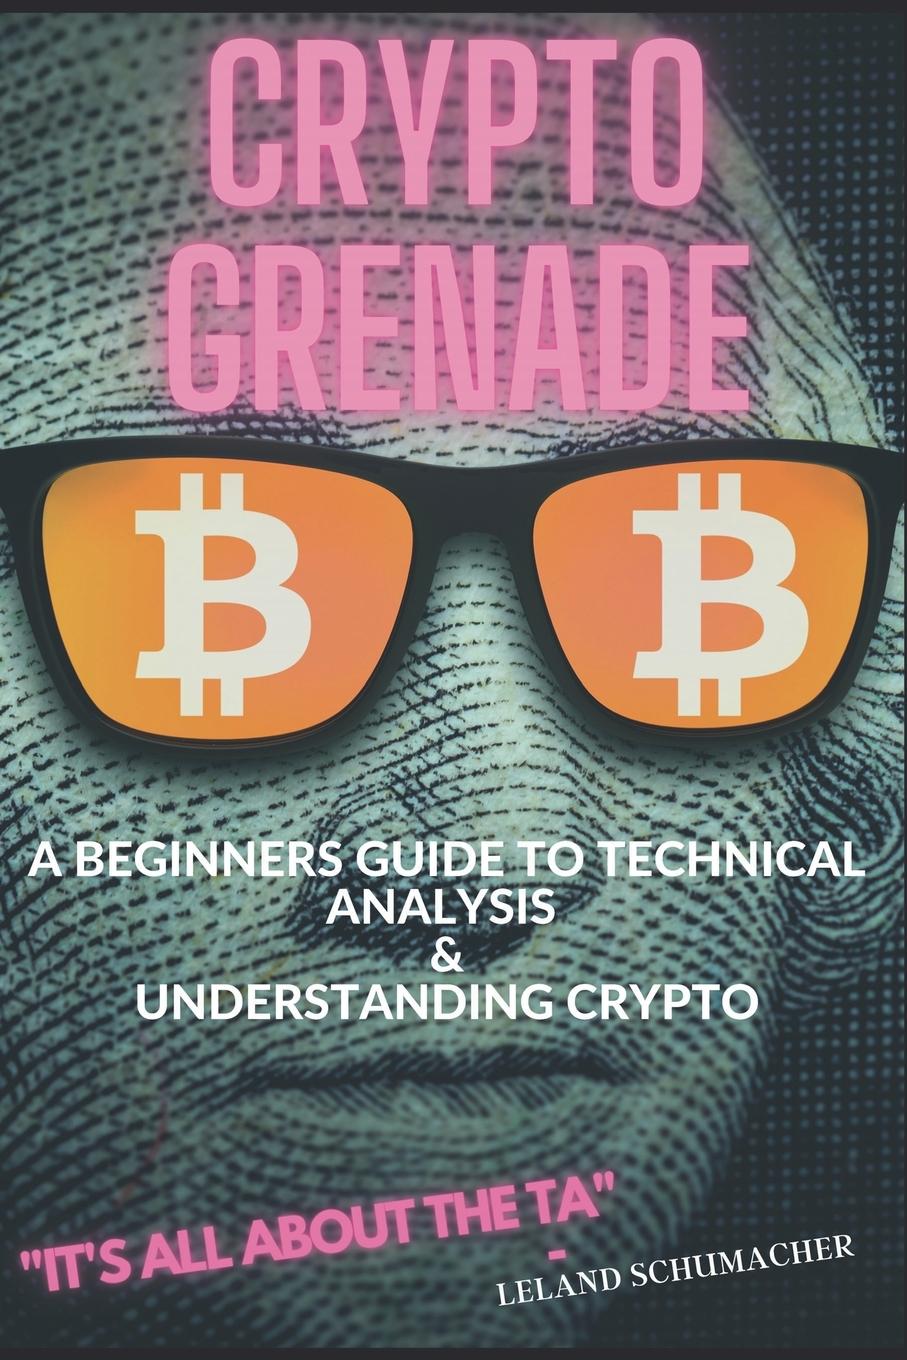 Könyv Crypto Grenade, A Beginners Guide to Technical Analysis & Understanding Crypto 